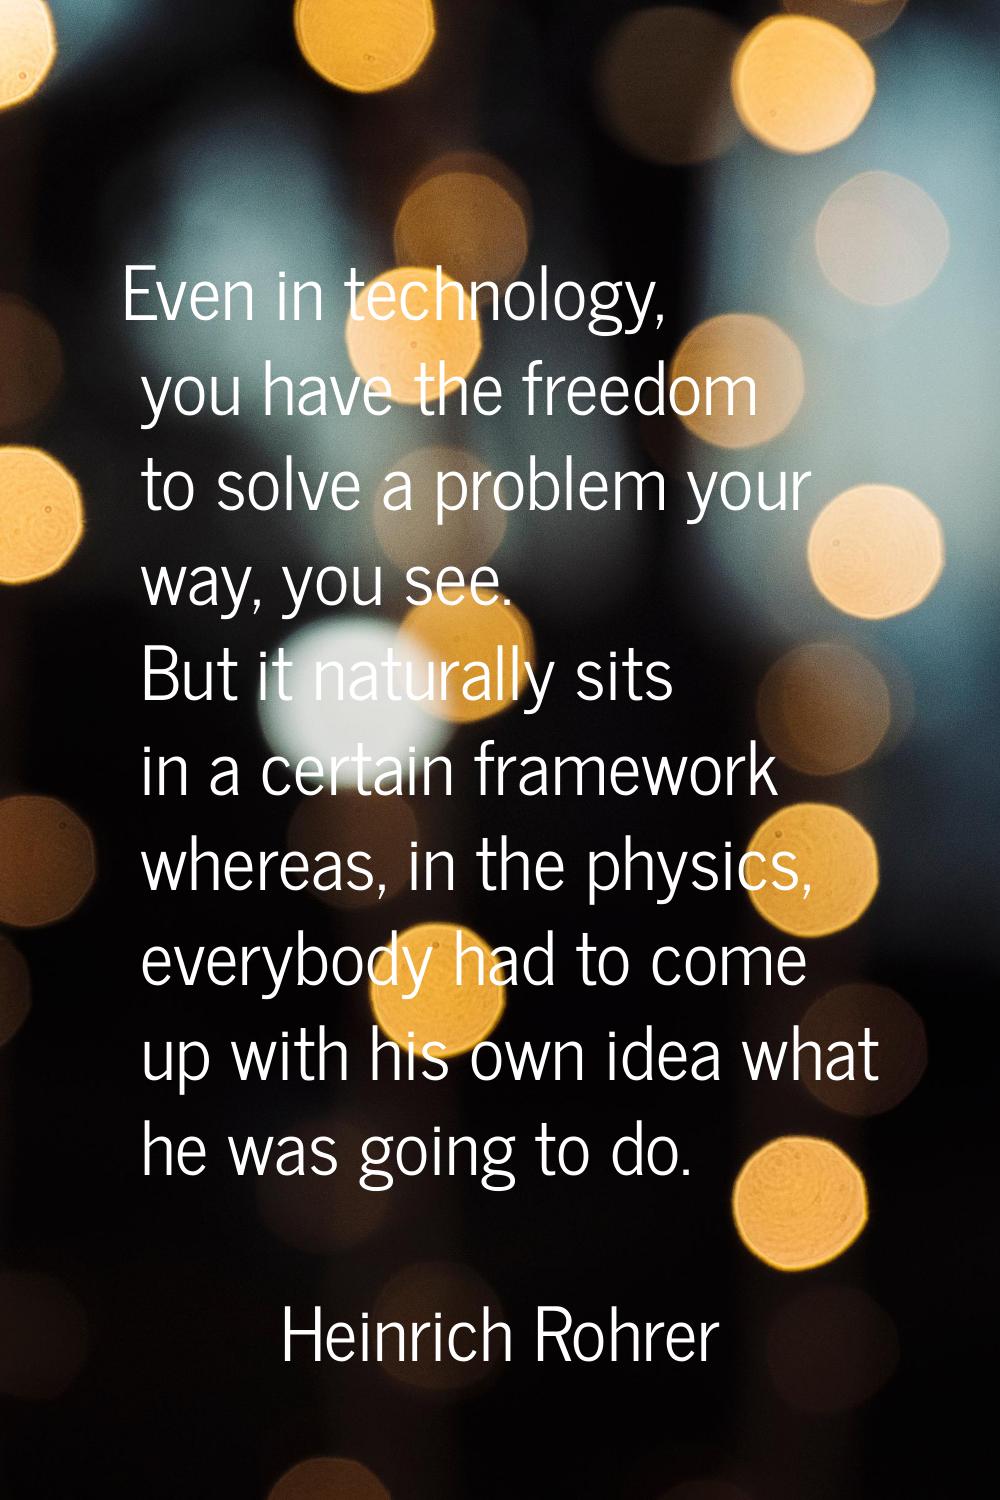 Even in technology, you have the freedom to solve a problem your way, you see. But it naturally sit